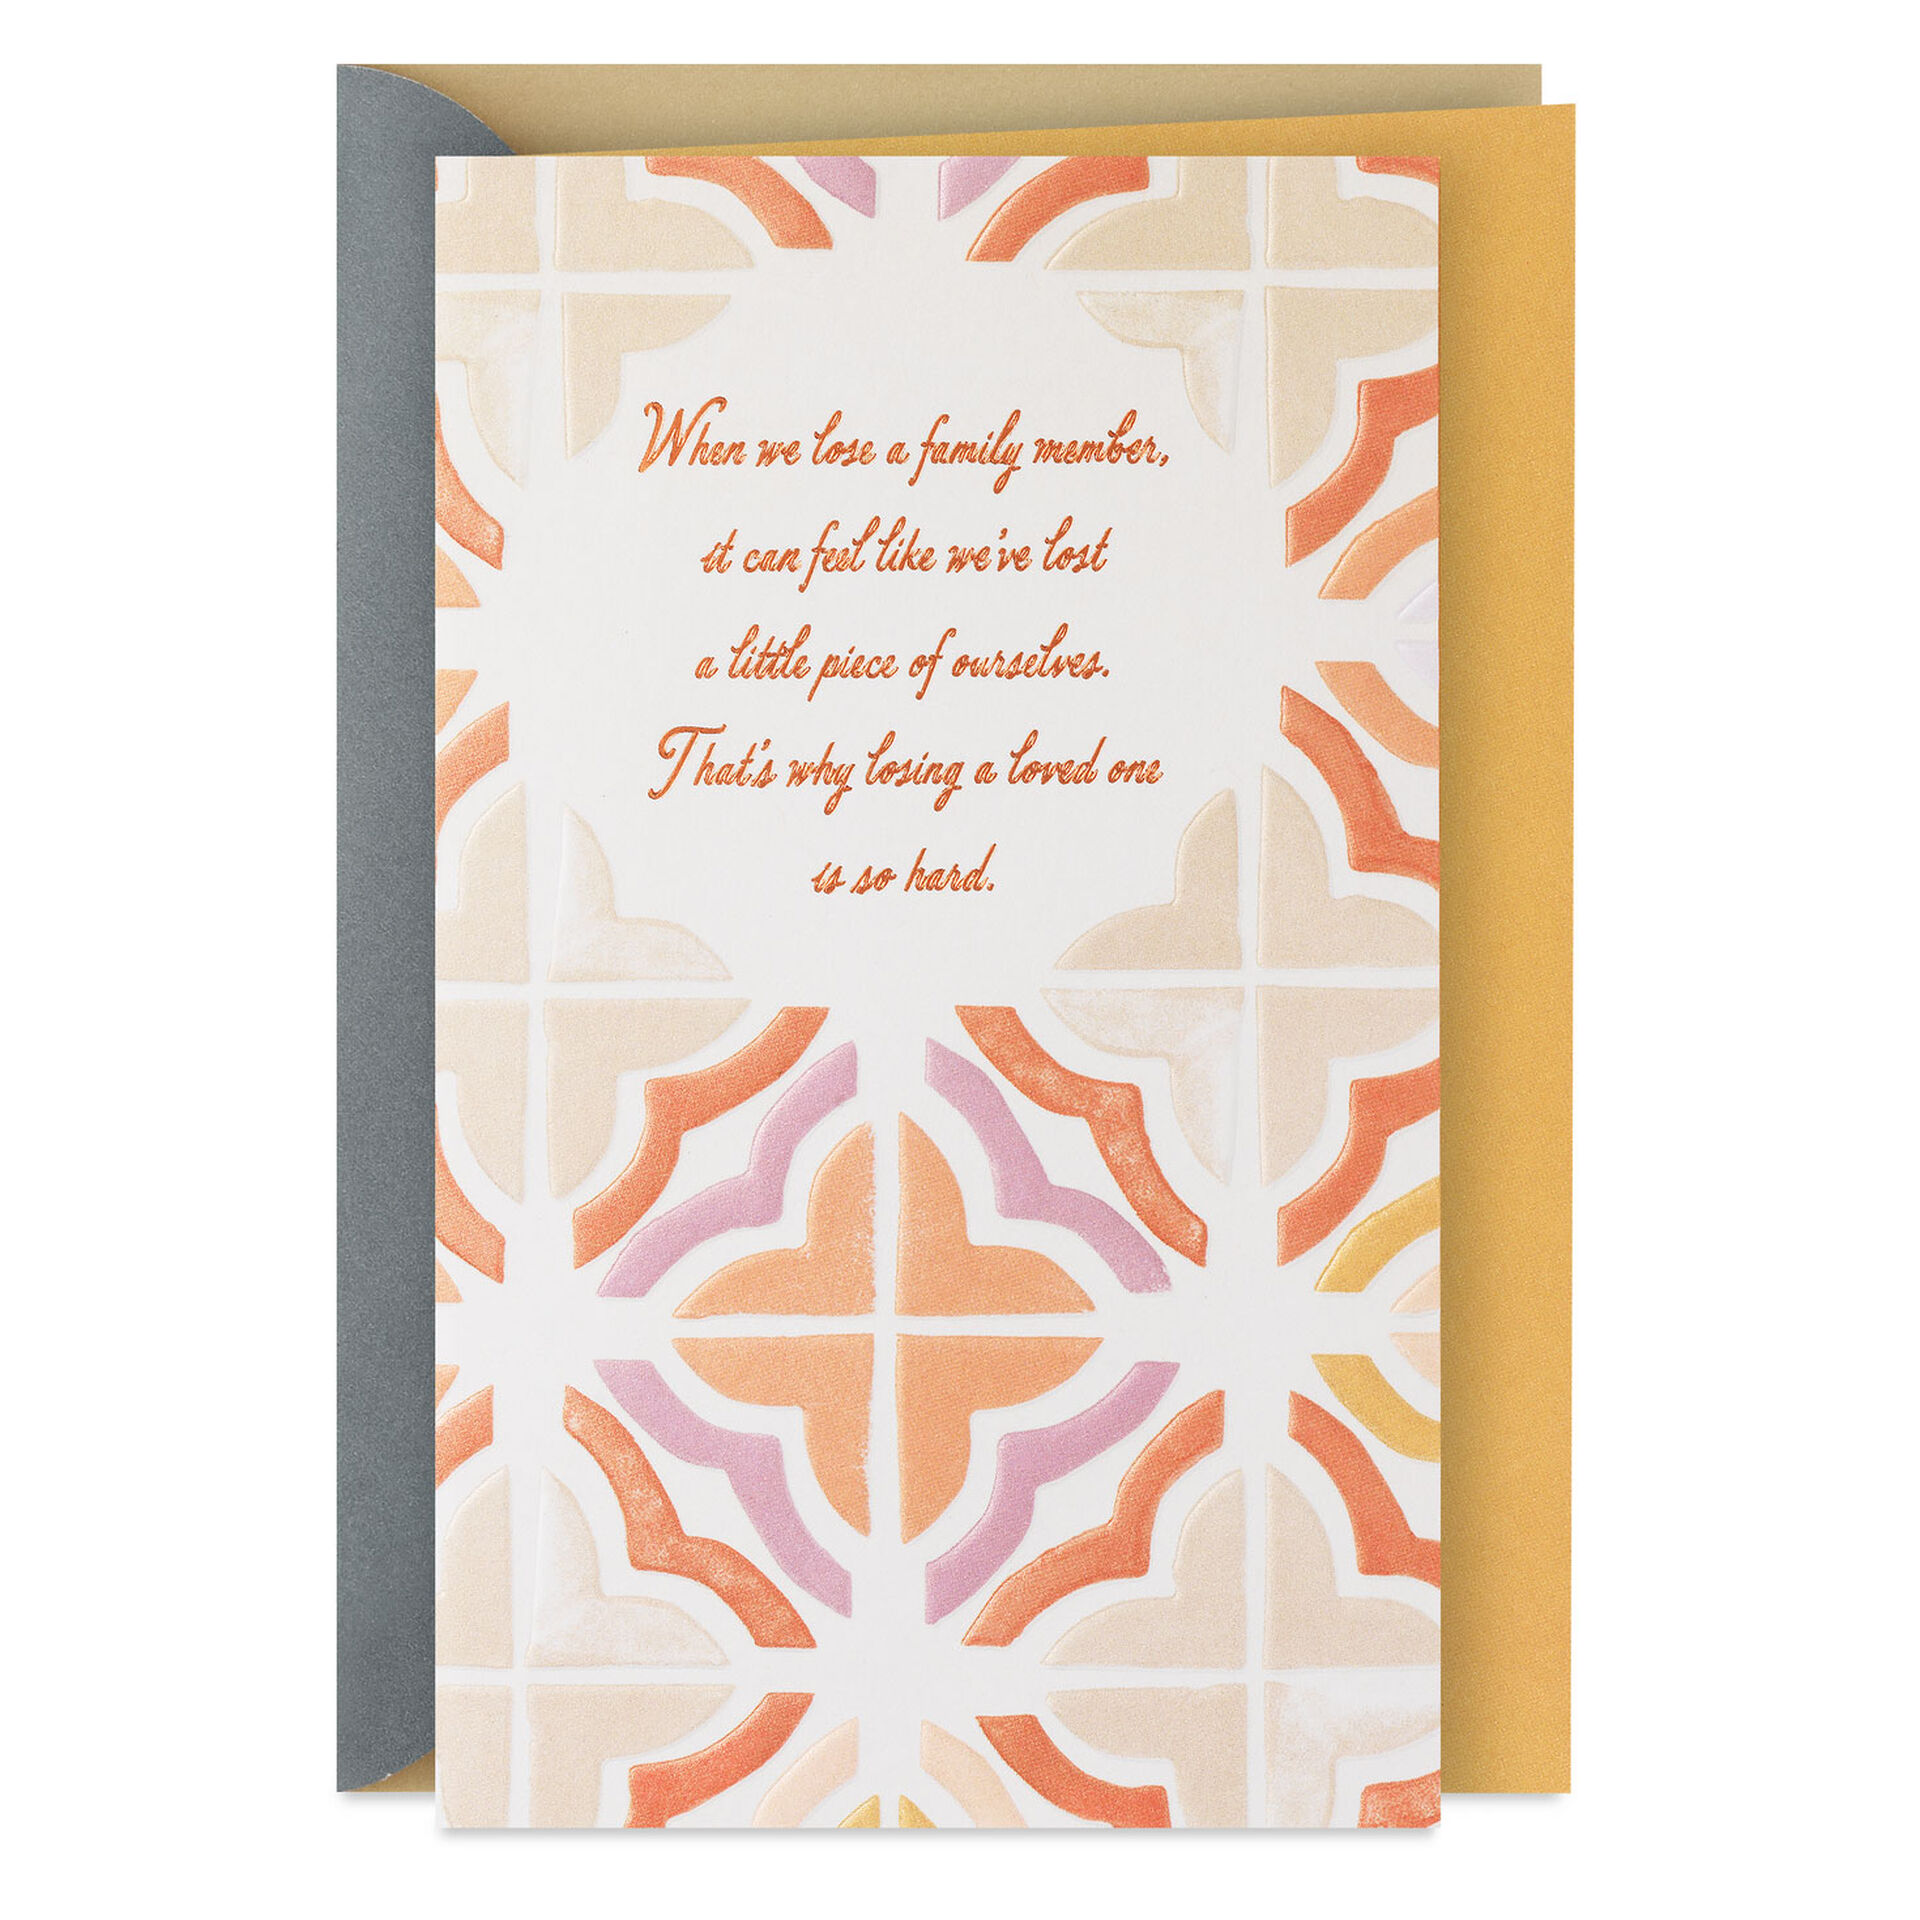 Tile-Pattern-Sympathy-Card-for-Loss-of-Family-Member_299S9478_01